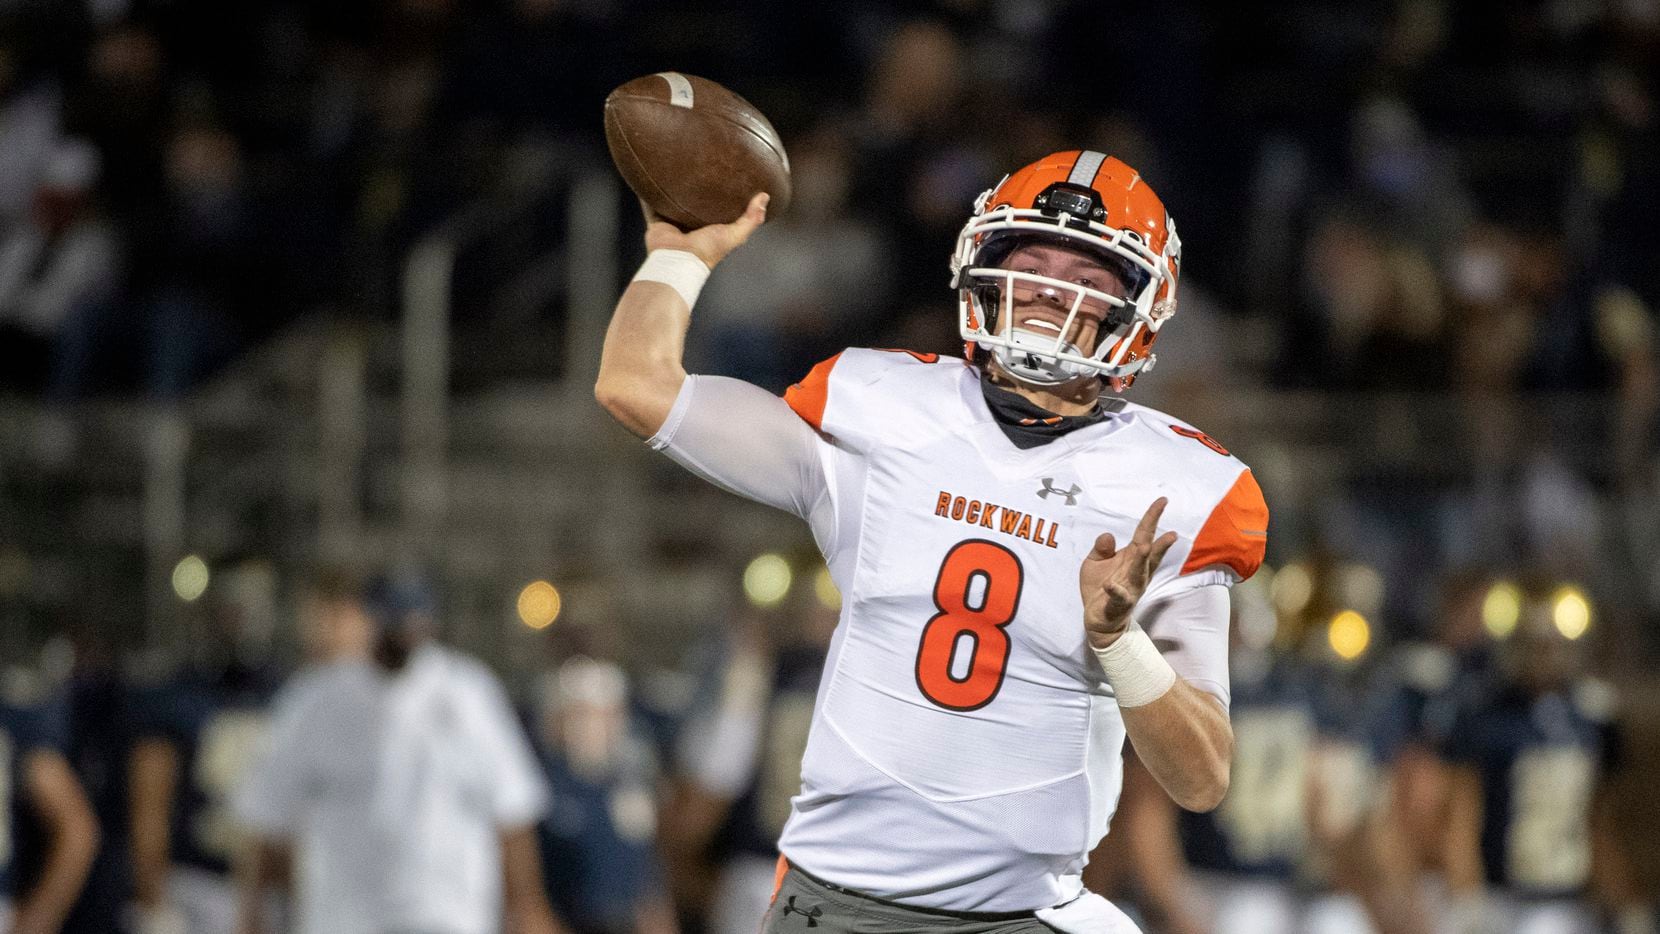 Rockwall junior quarterback Braedyn Locke (8) throws a pass during the second half of a high school football game against Jesuit on Friday, October 2, 2020 at Postell Stadium in Dallas. Rockwall won 60-38.